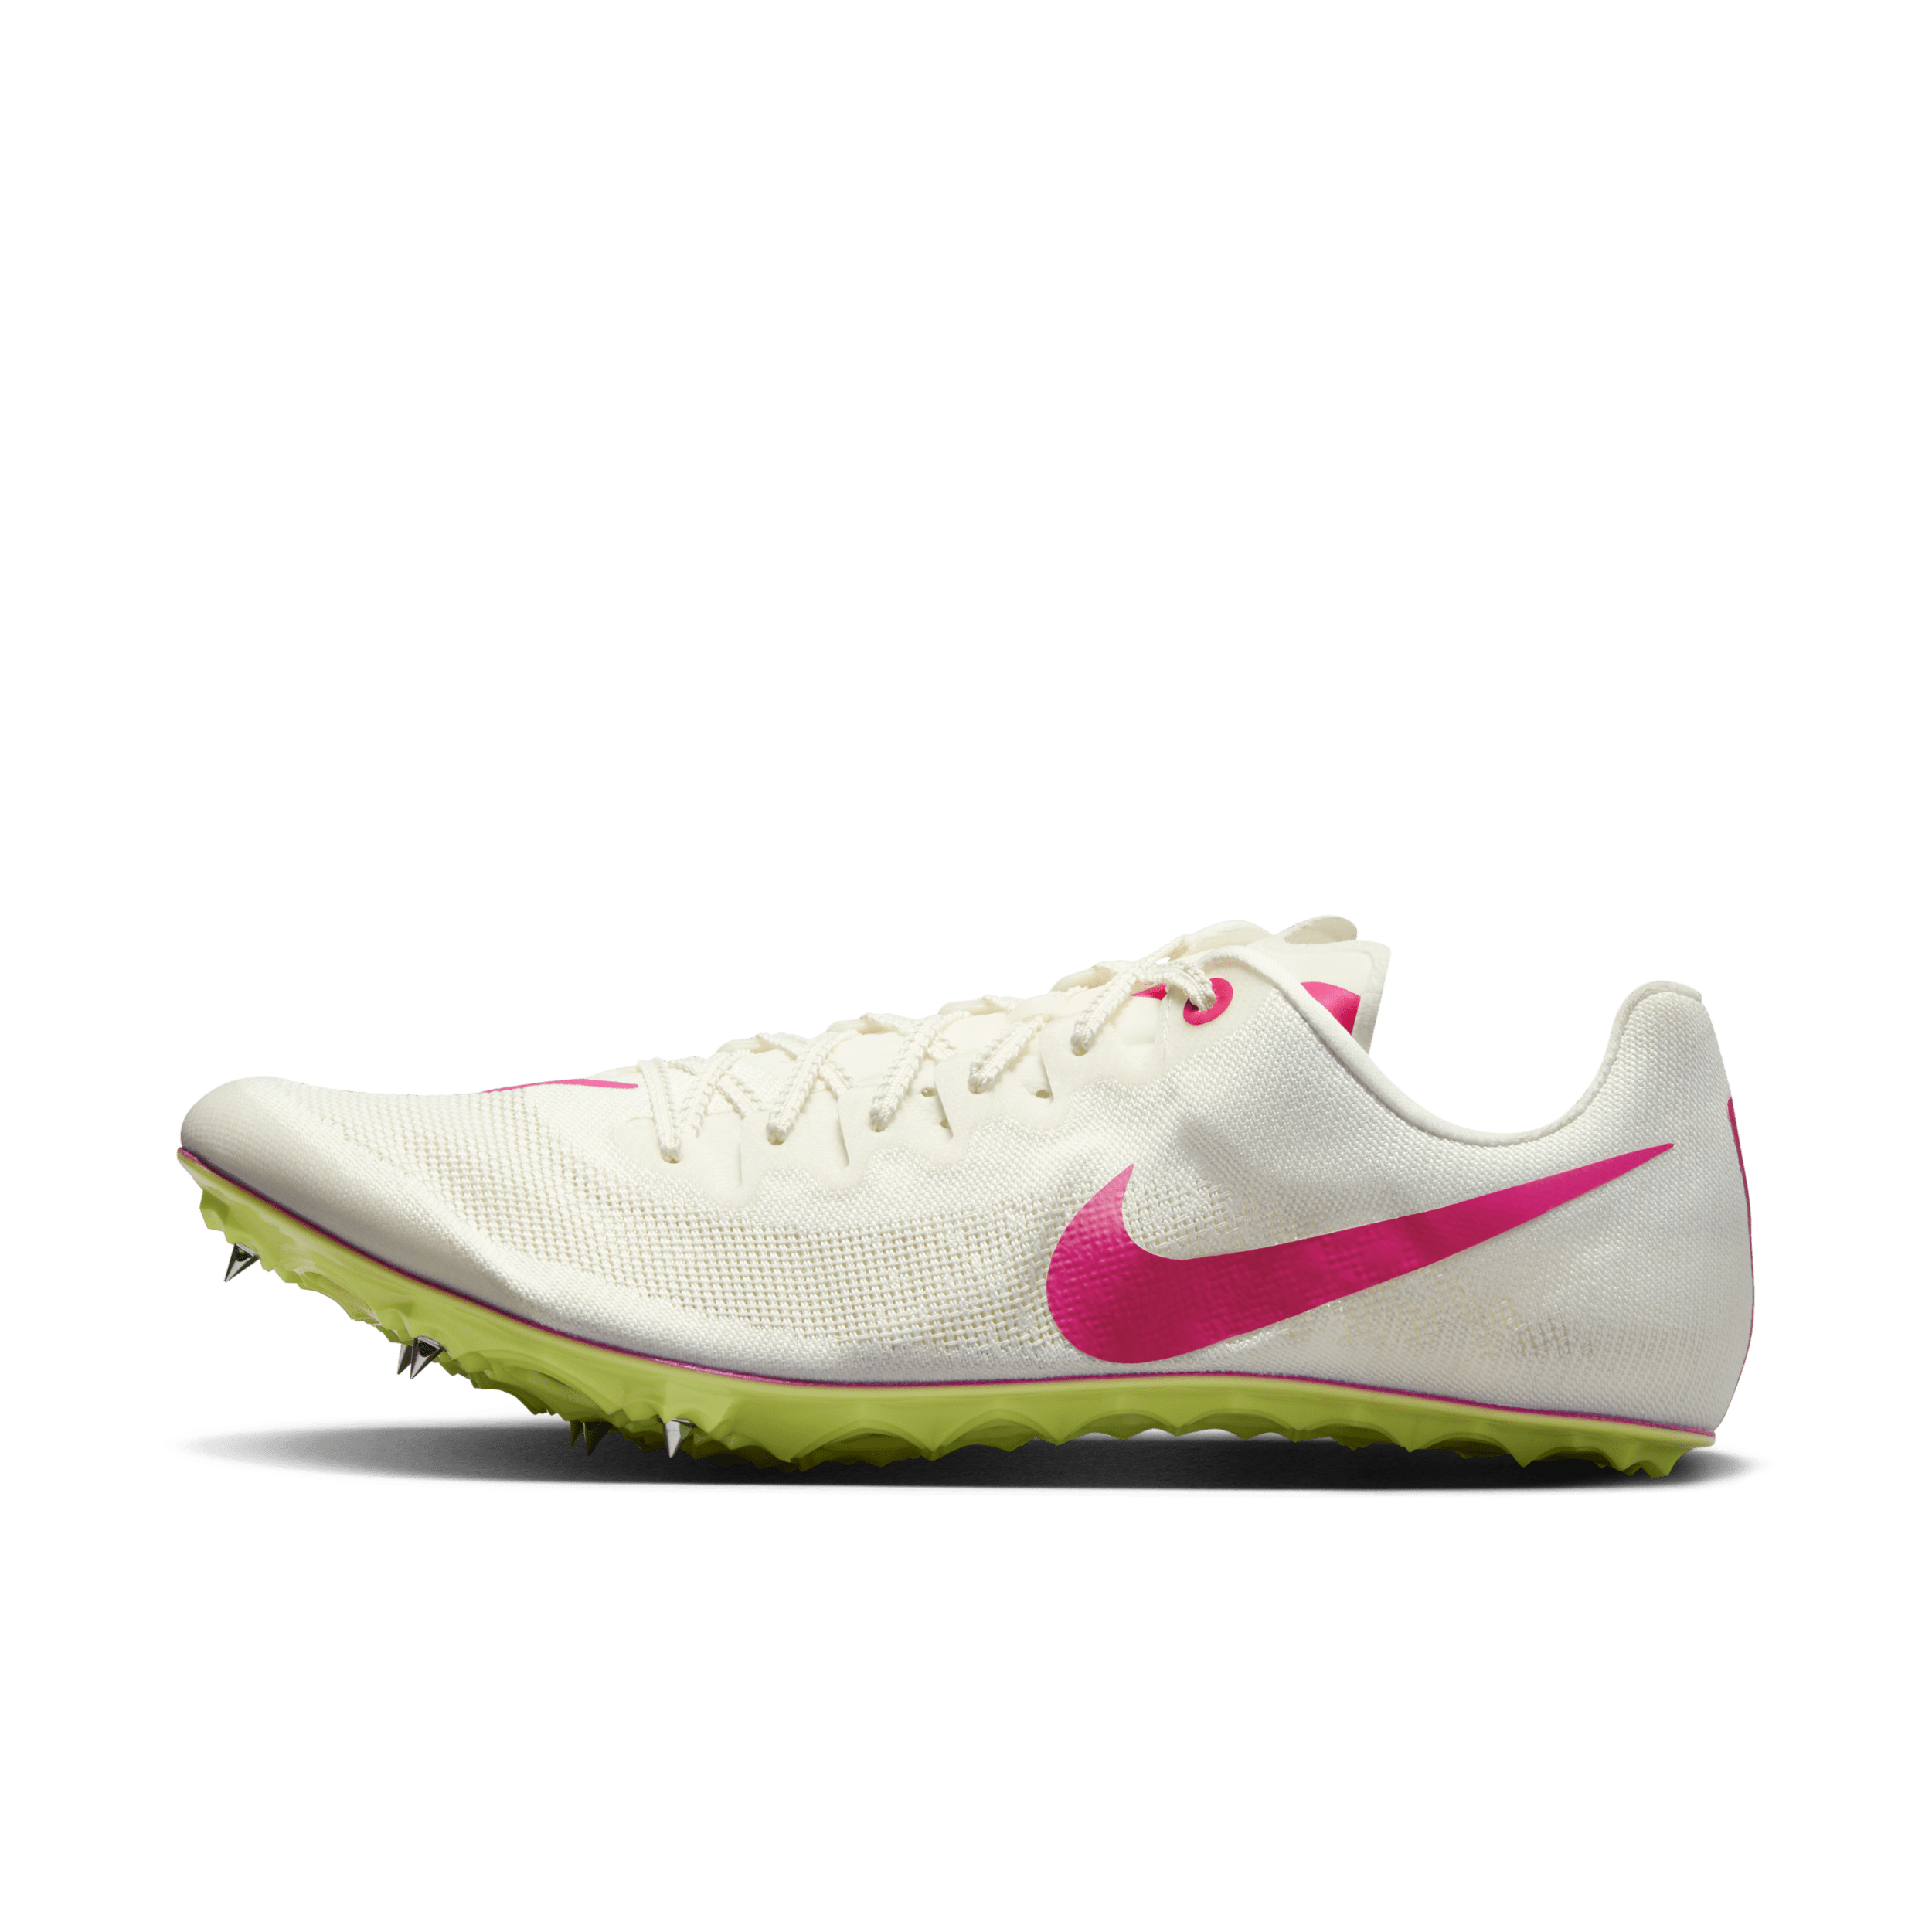 Nike Ja Fly 4 Track and Field sprinting spikes - Wit